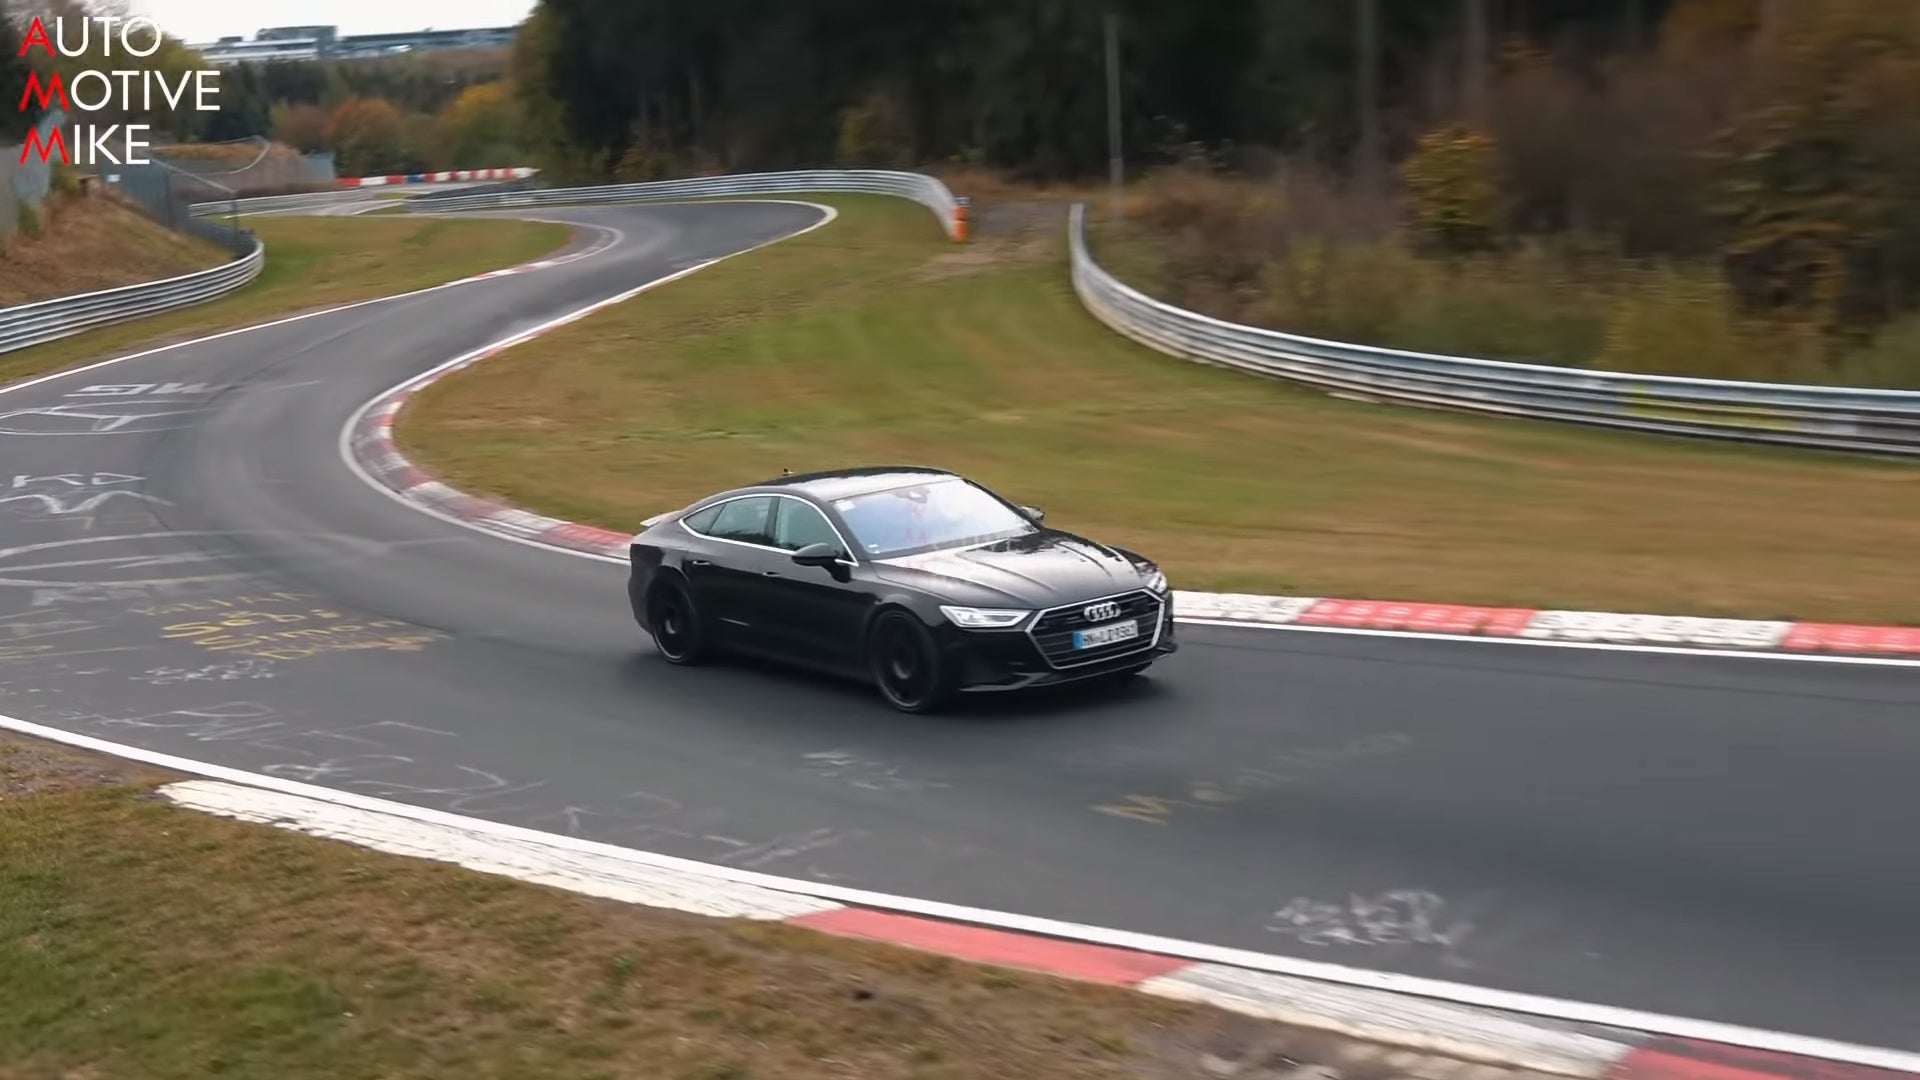 Listen to the 2020 Audi RS 7 Assault the Nurburgring With Its Thunderous Twin-Turbo V8